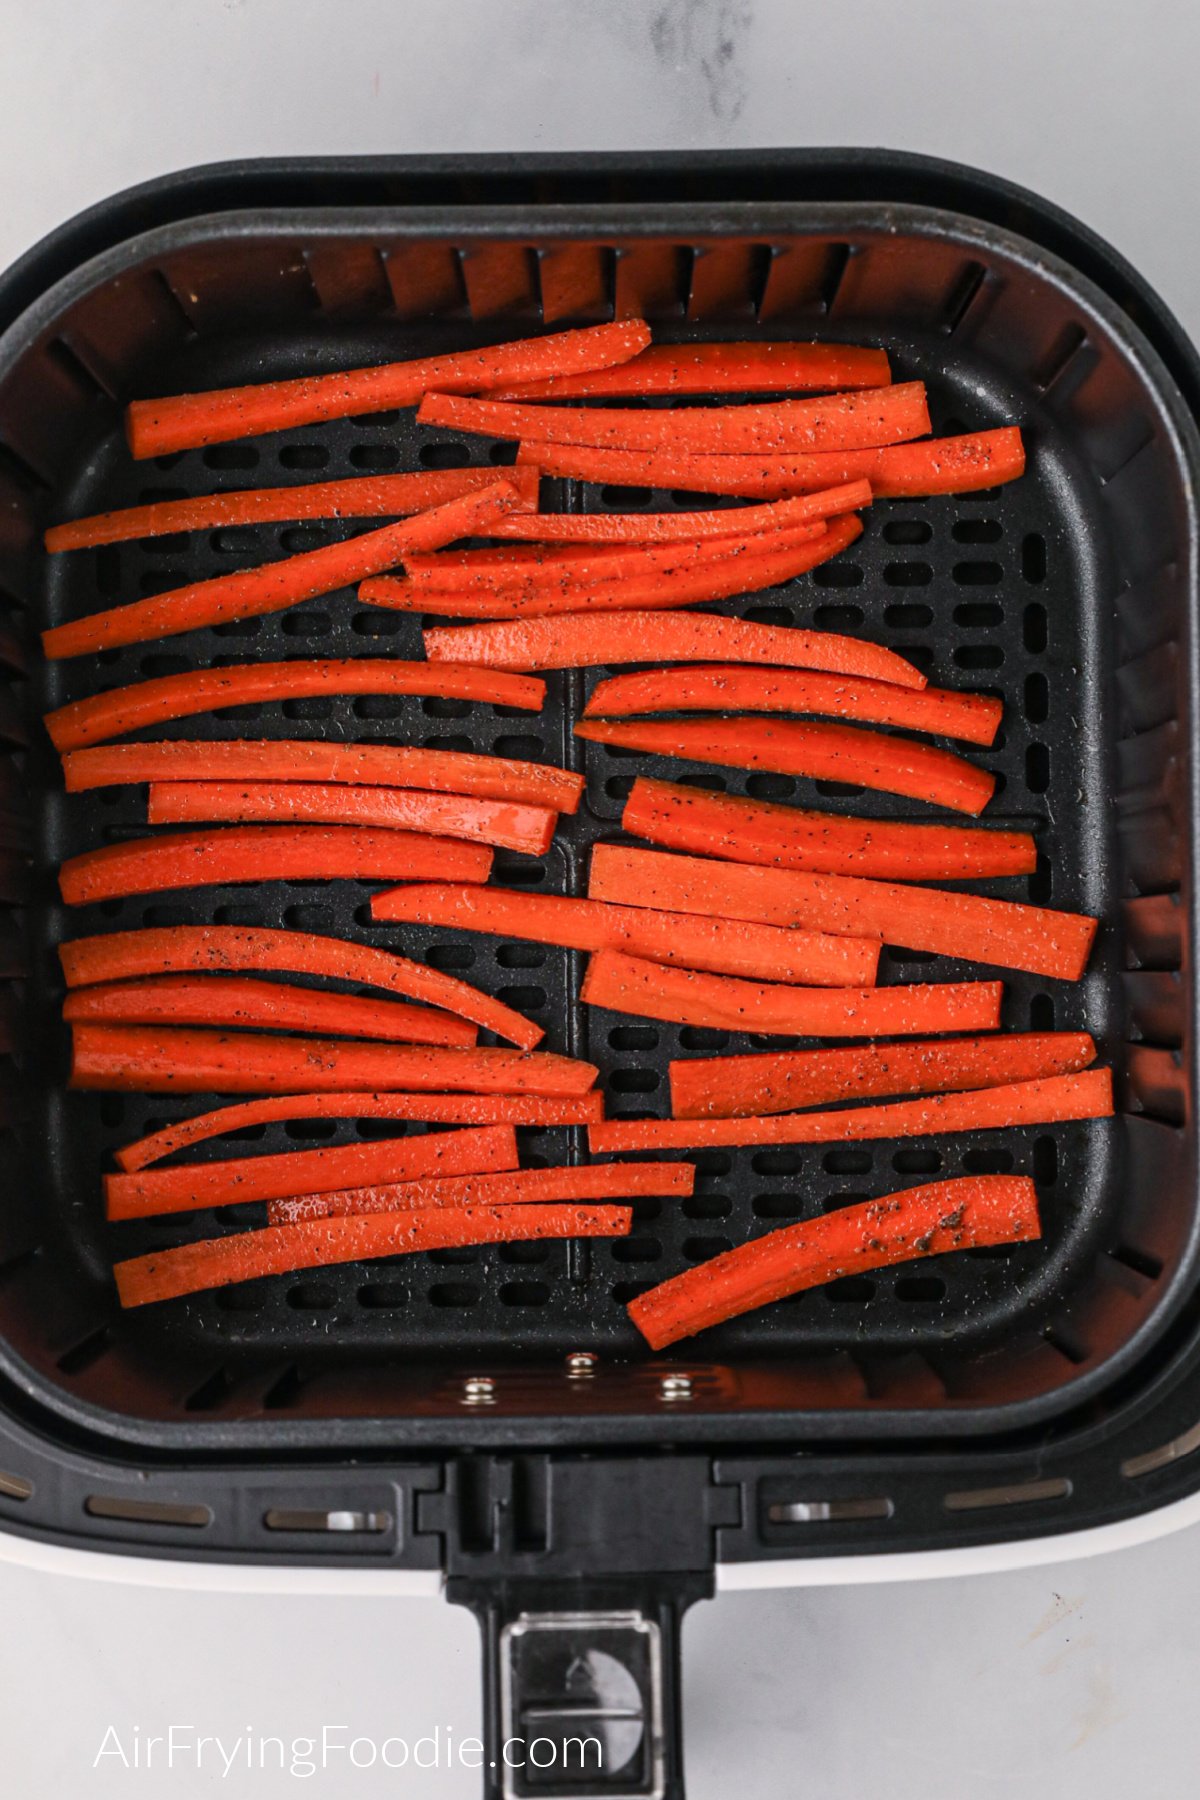 Carrot fries cut and placed in the air fryer basket.